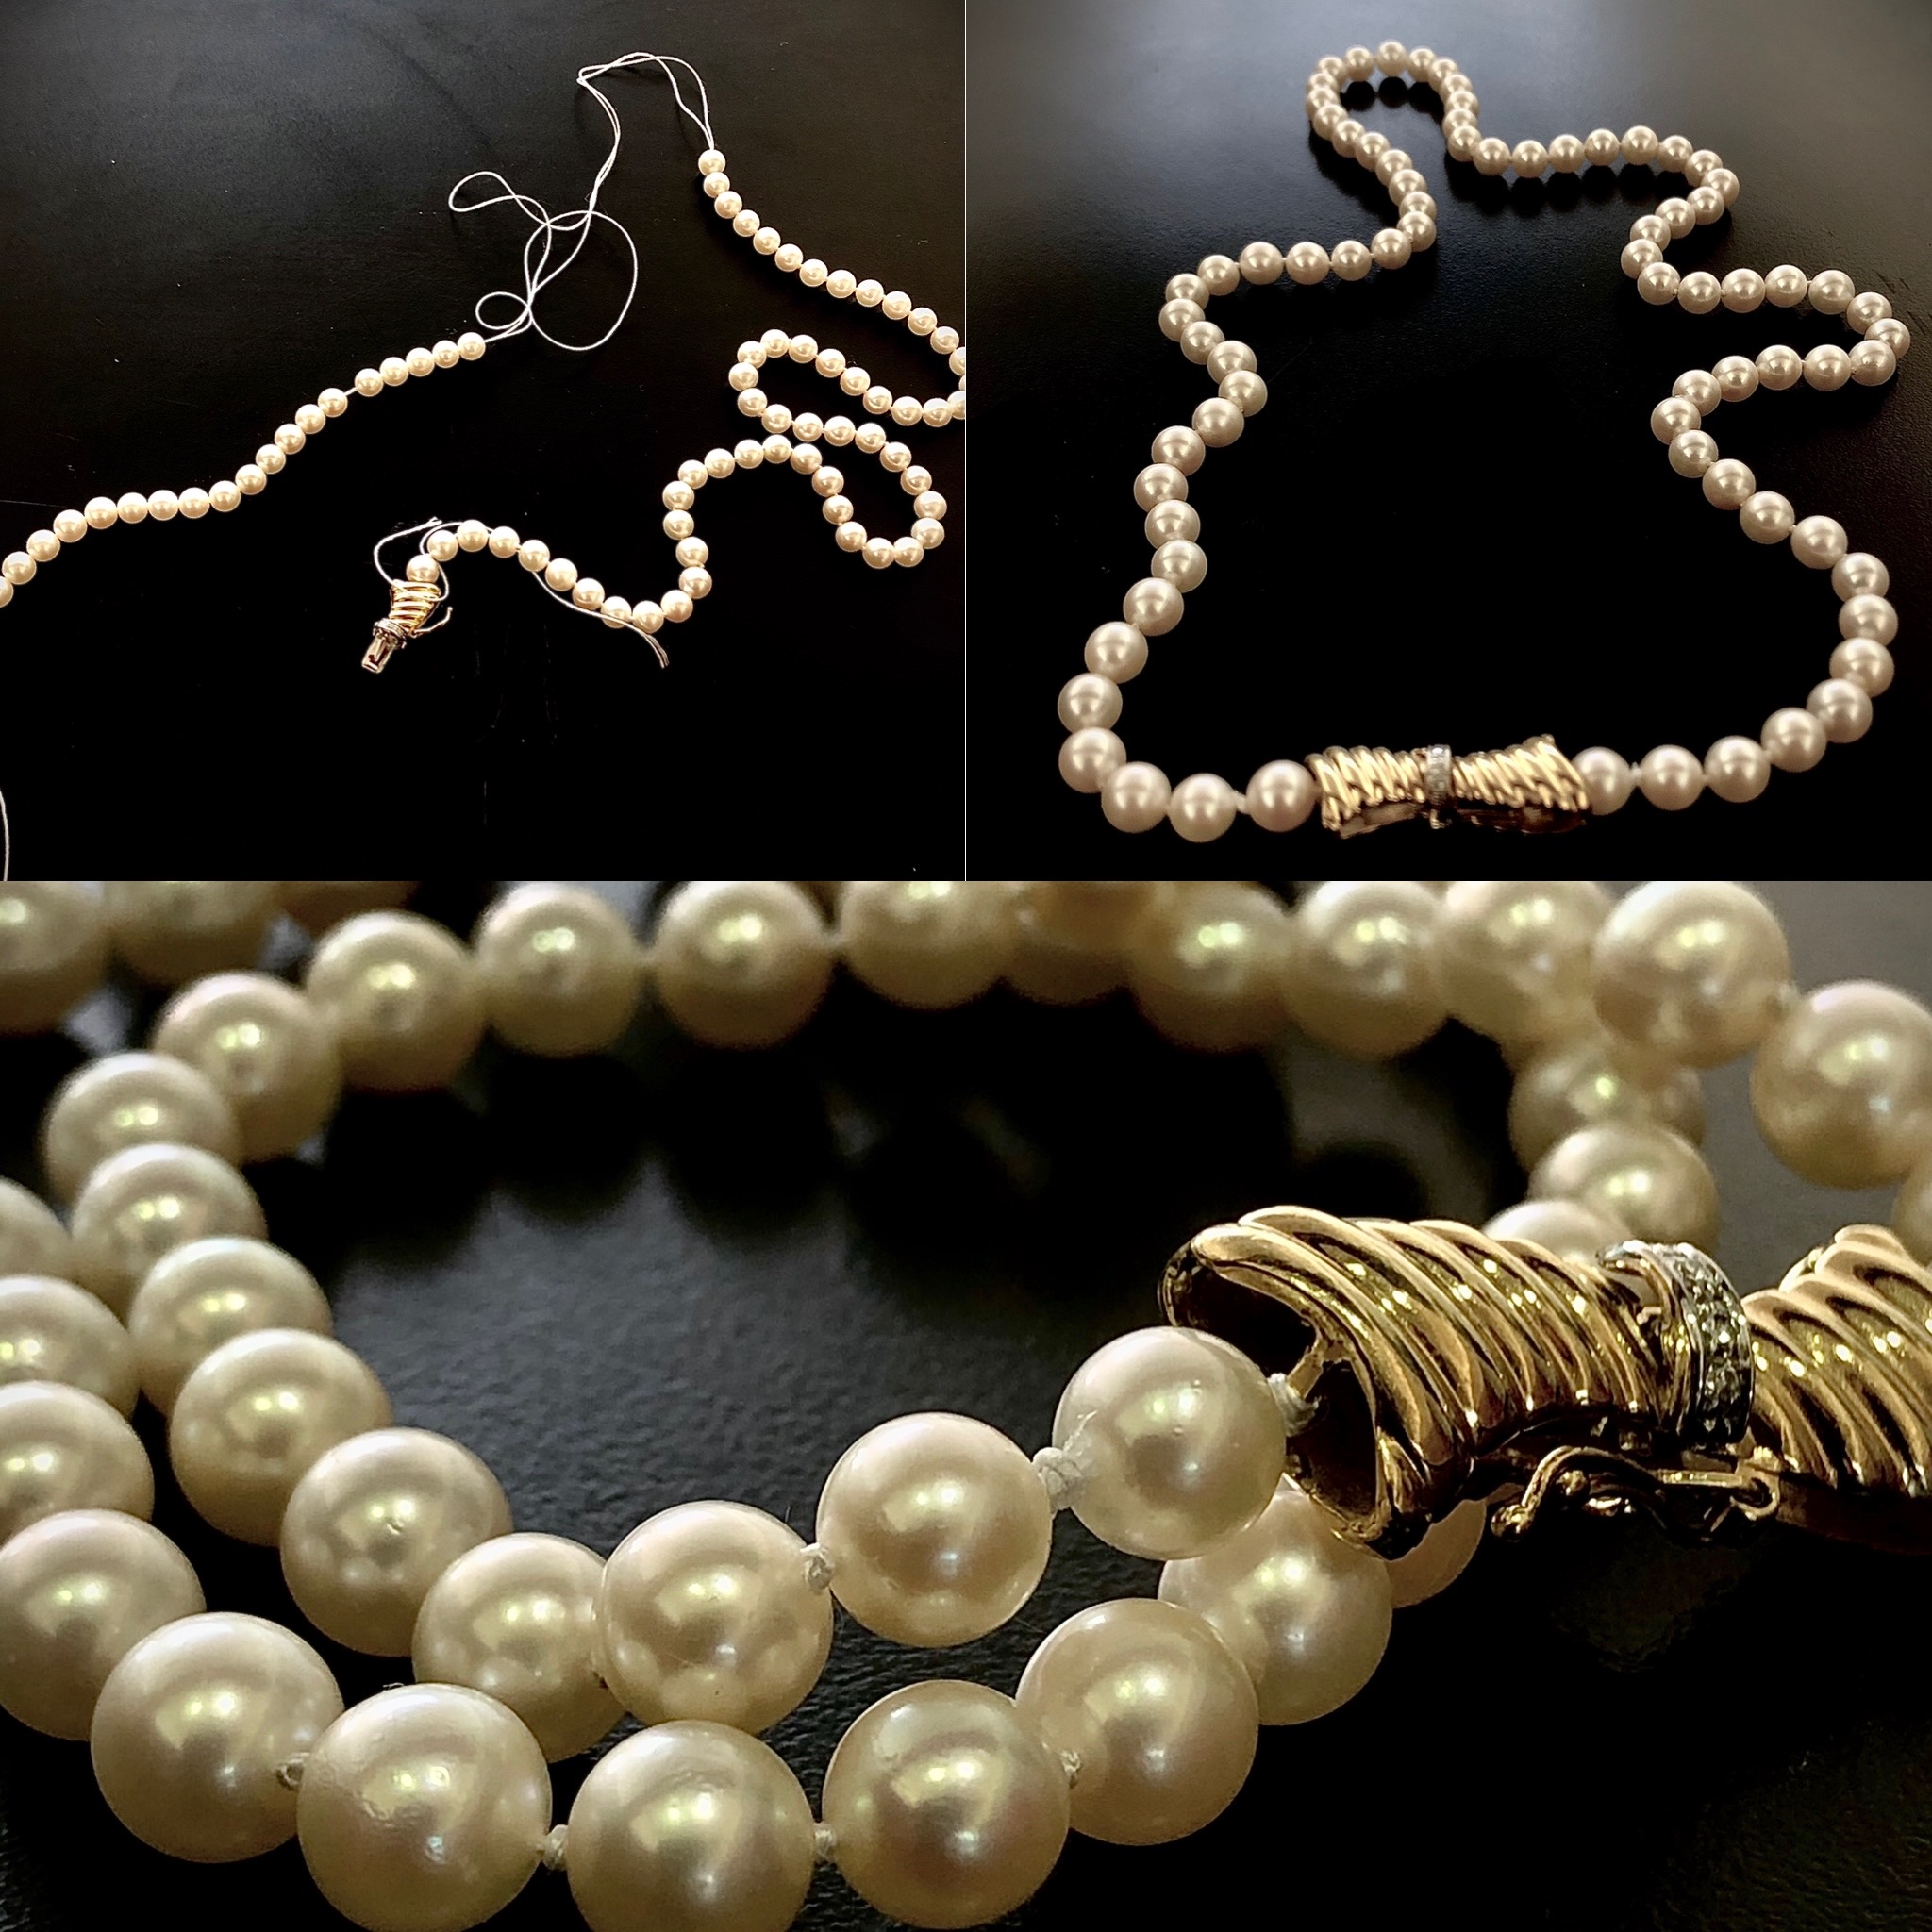 Restring pearl necklace